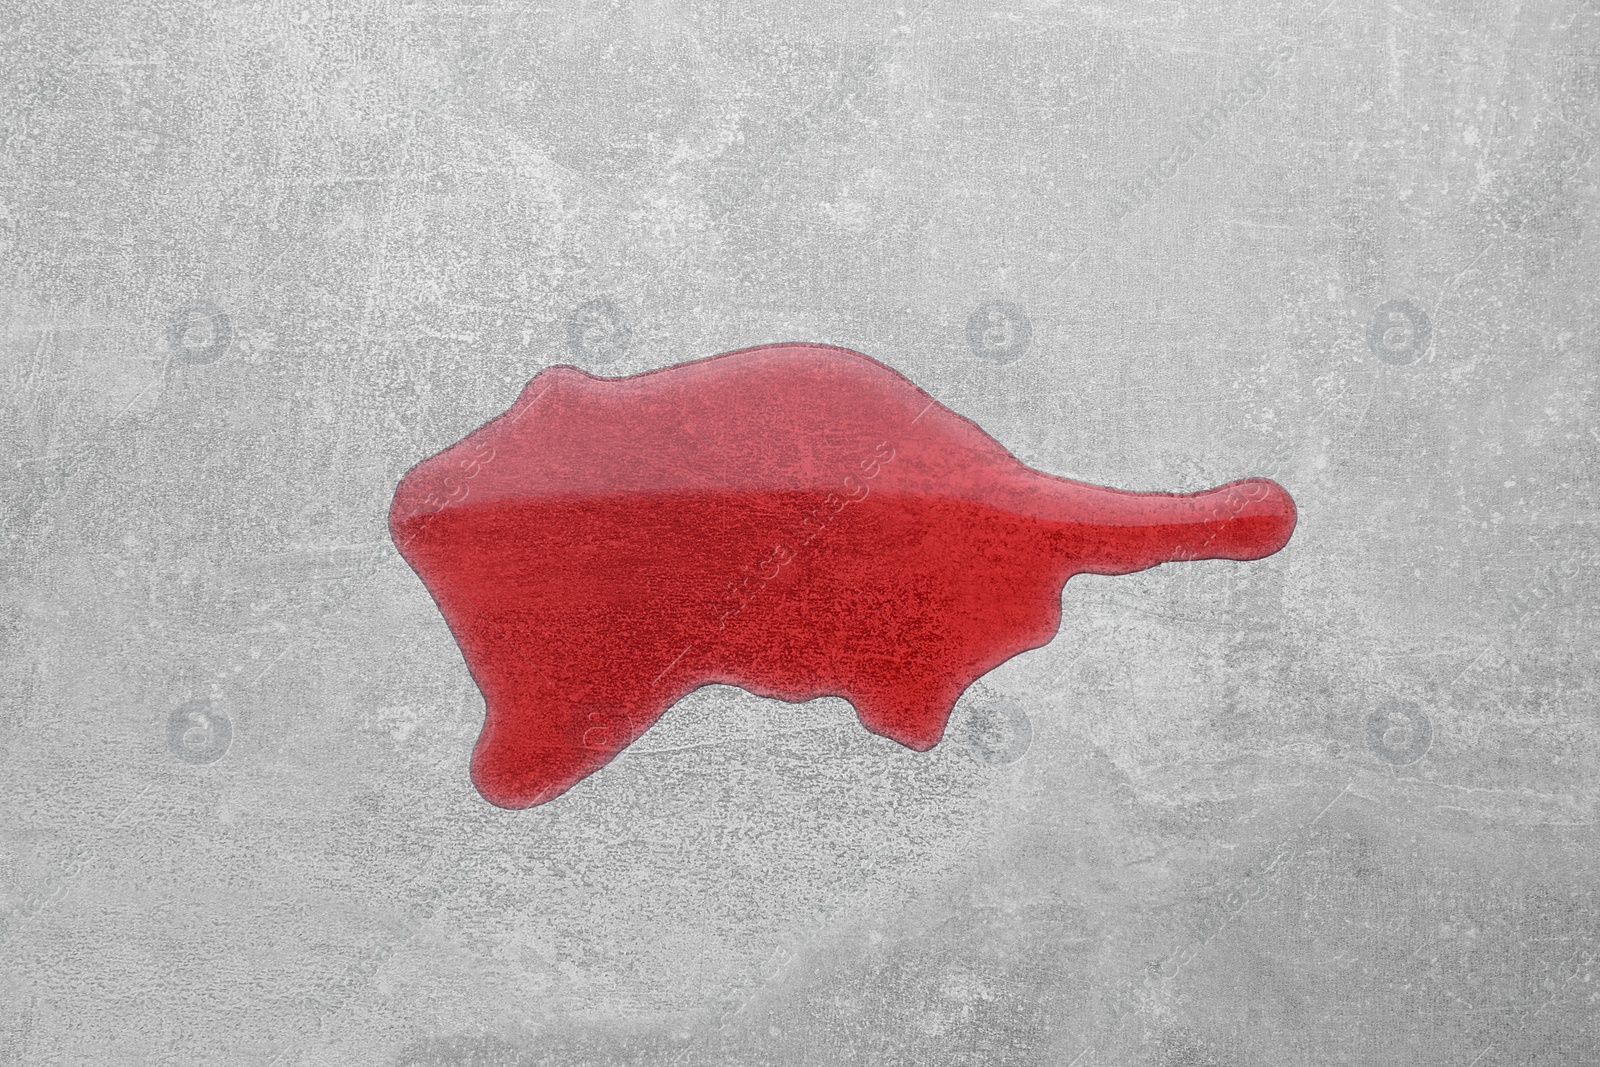 Photo of Puddle of red liquid on light grey surface, top view